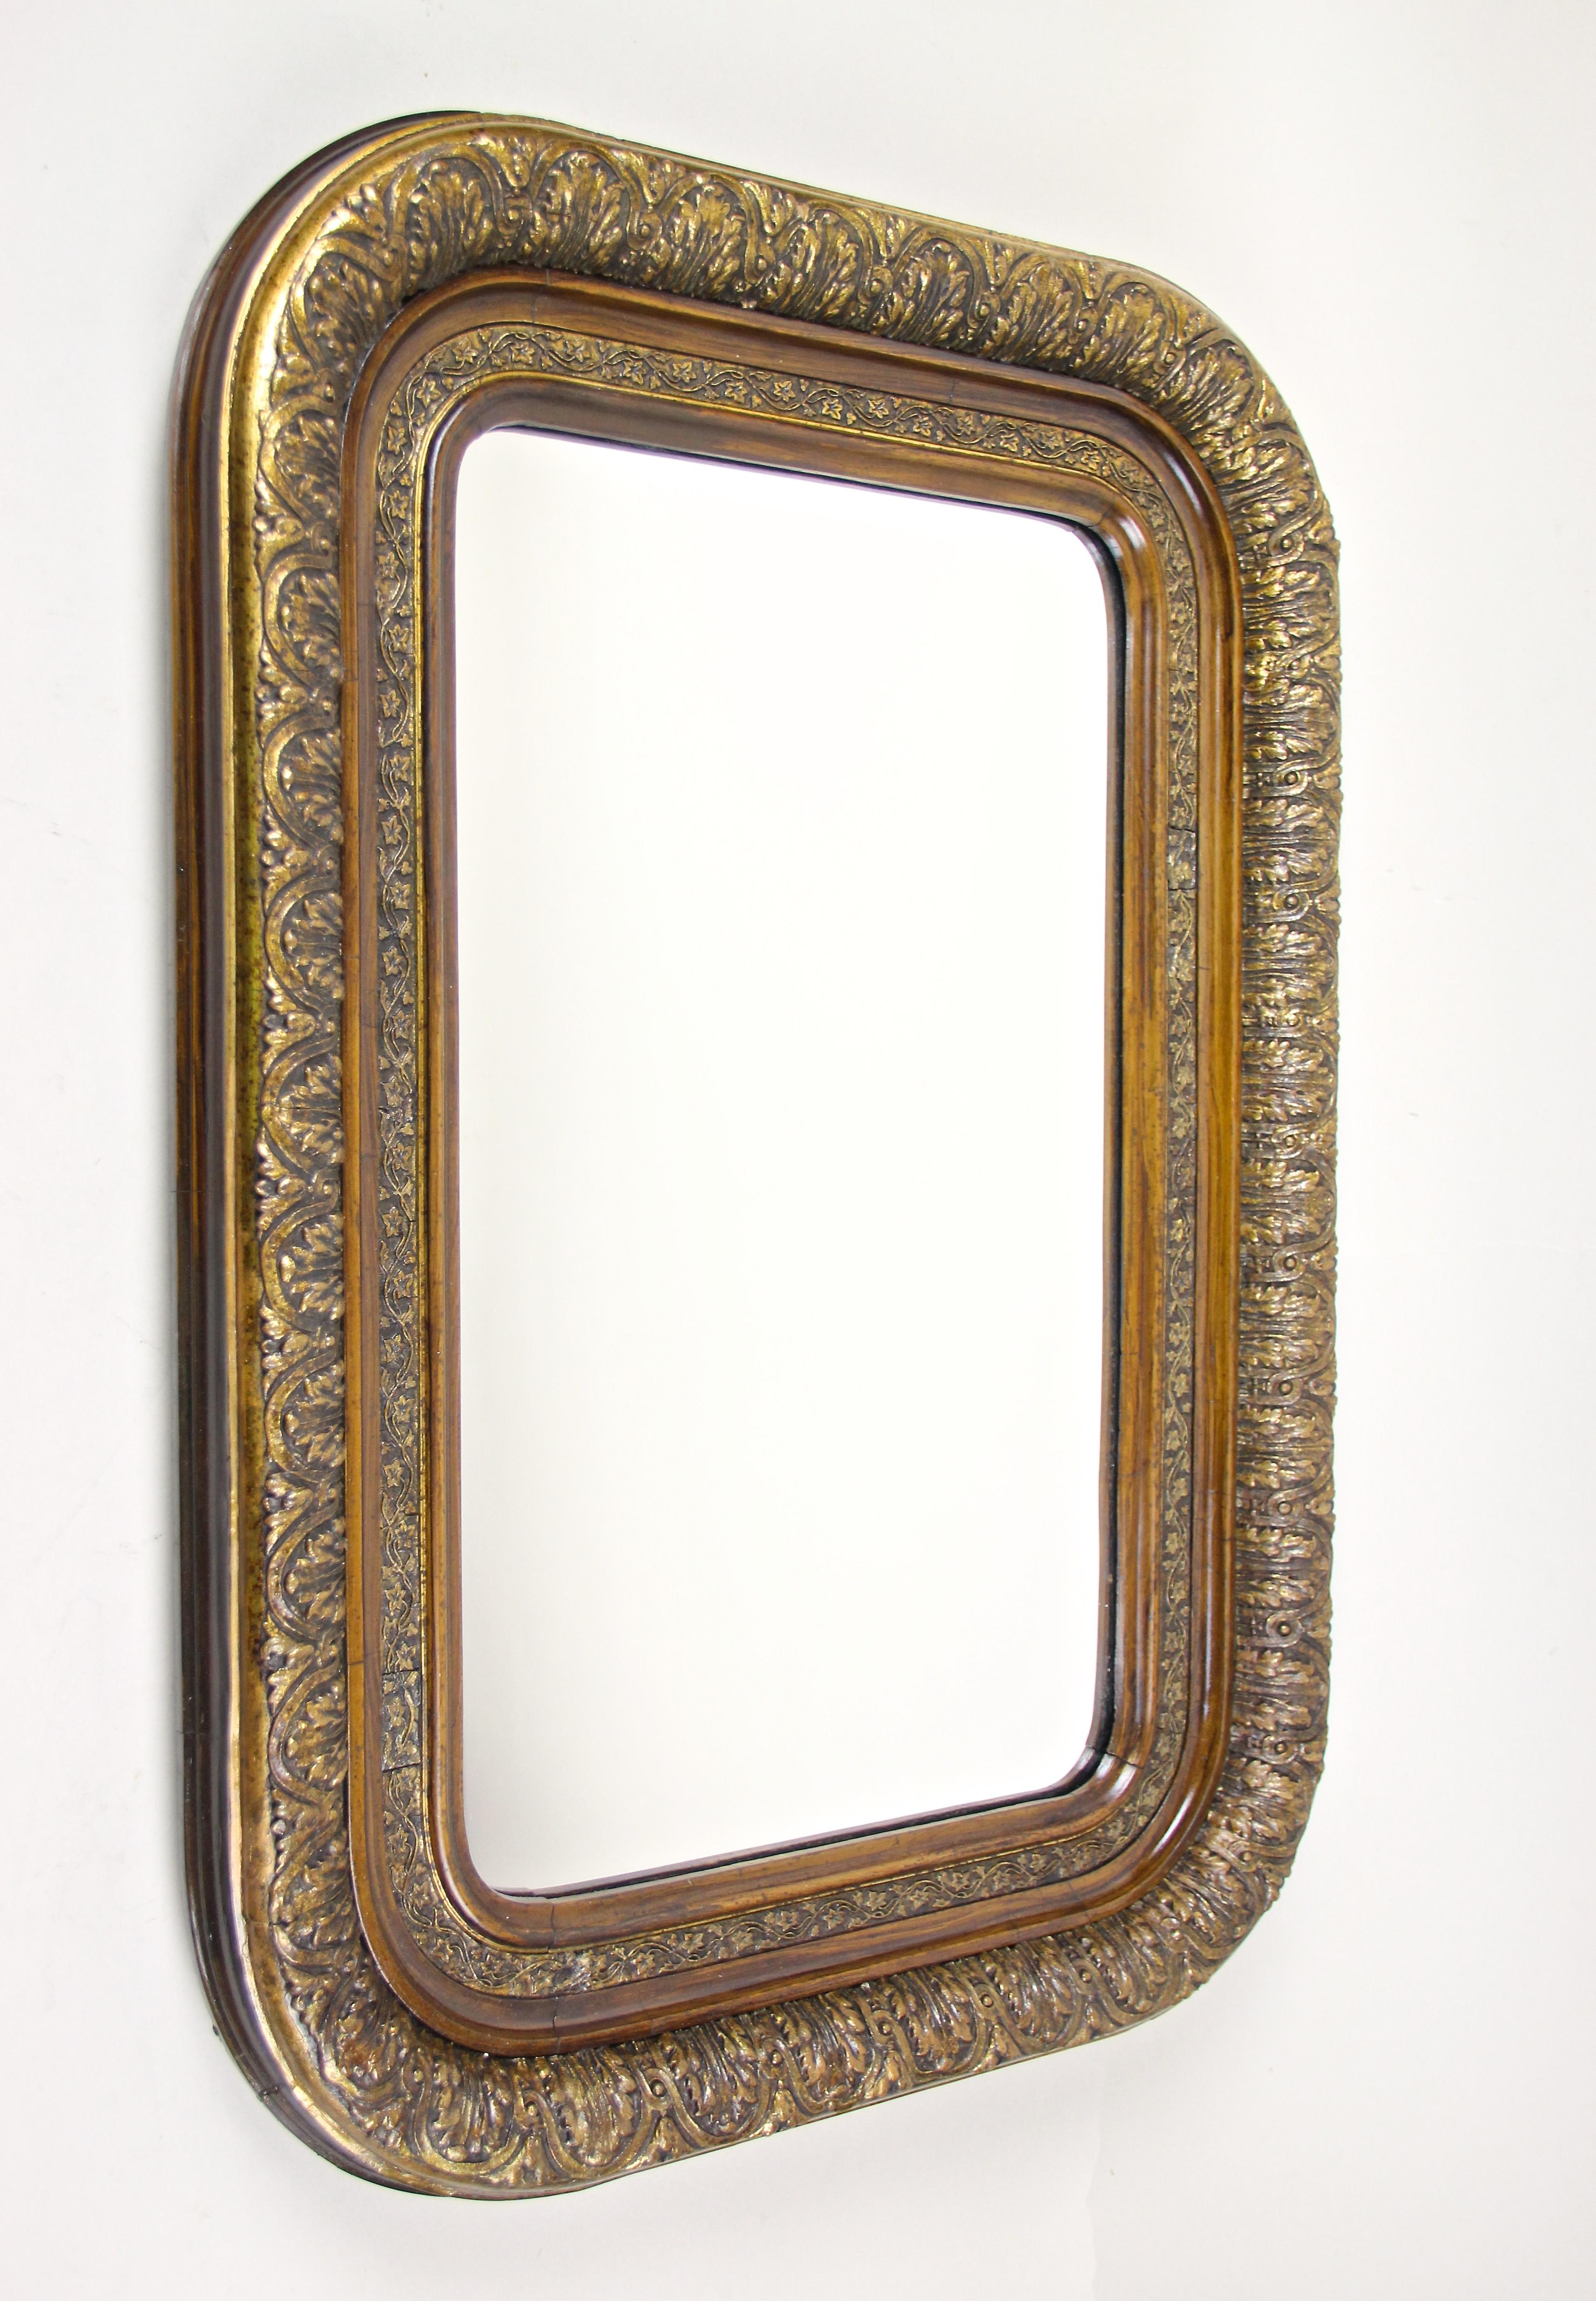 Exceptional gilt Biedermeier wall mirror with rounded corners from the period circa 1840 in Austria. Impressing with beautiful designed gilt stucco works and unusual wooden looking inner bars (these are also stucco but painted like wood!) this